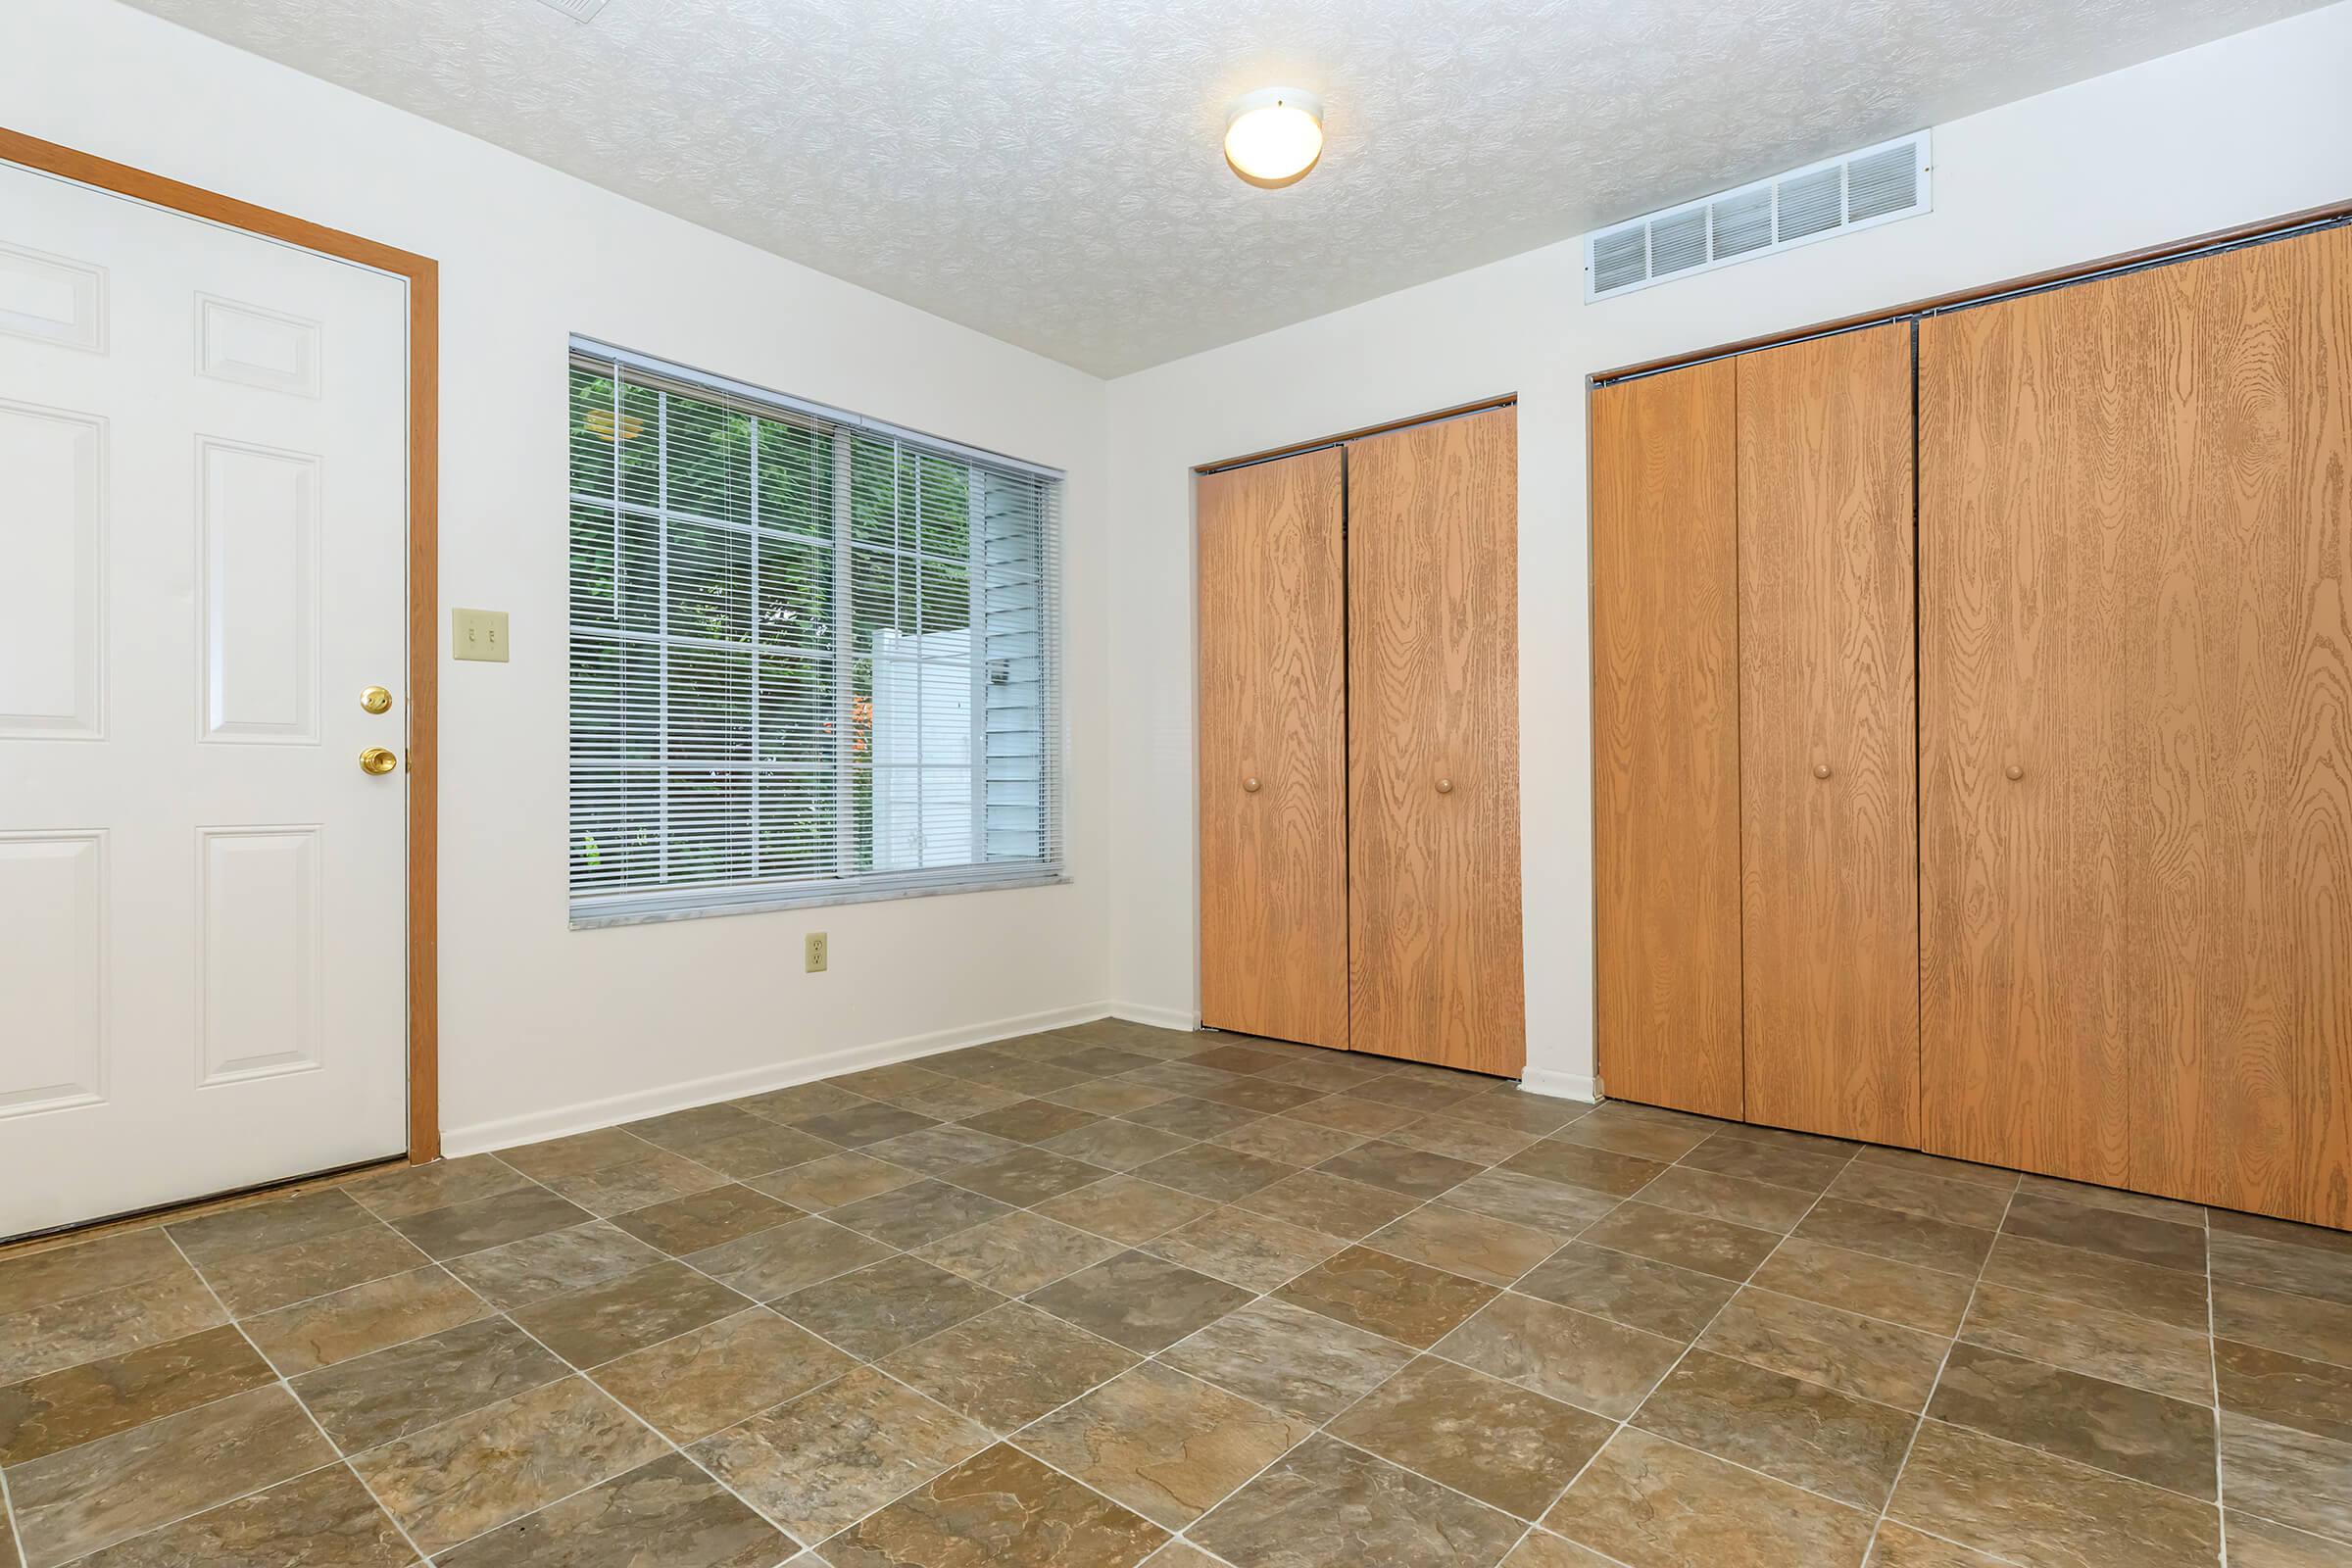 a kitchen with a wooden floor